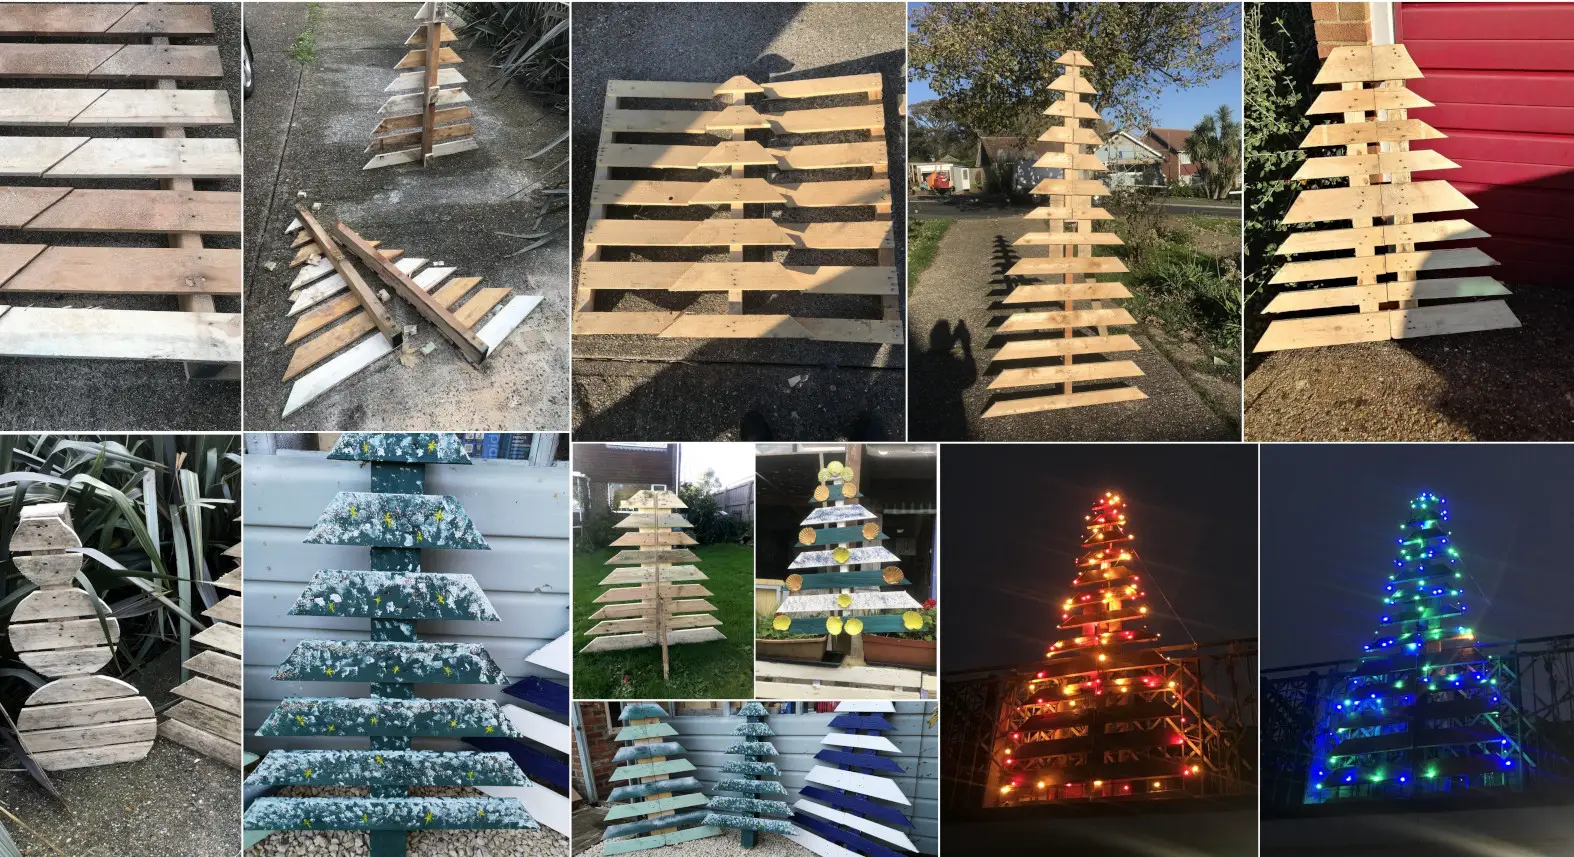 Christmas trees made from pallets